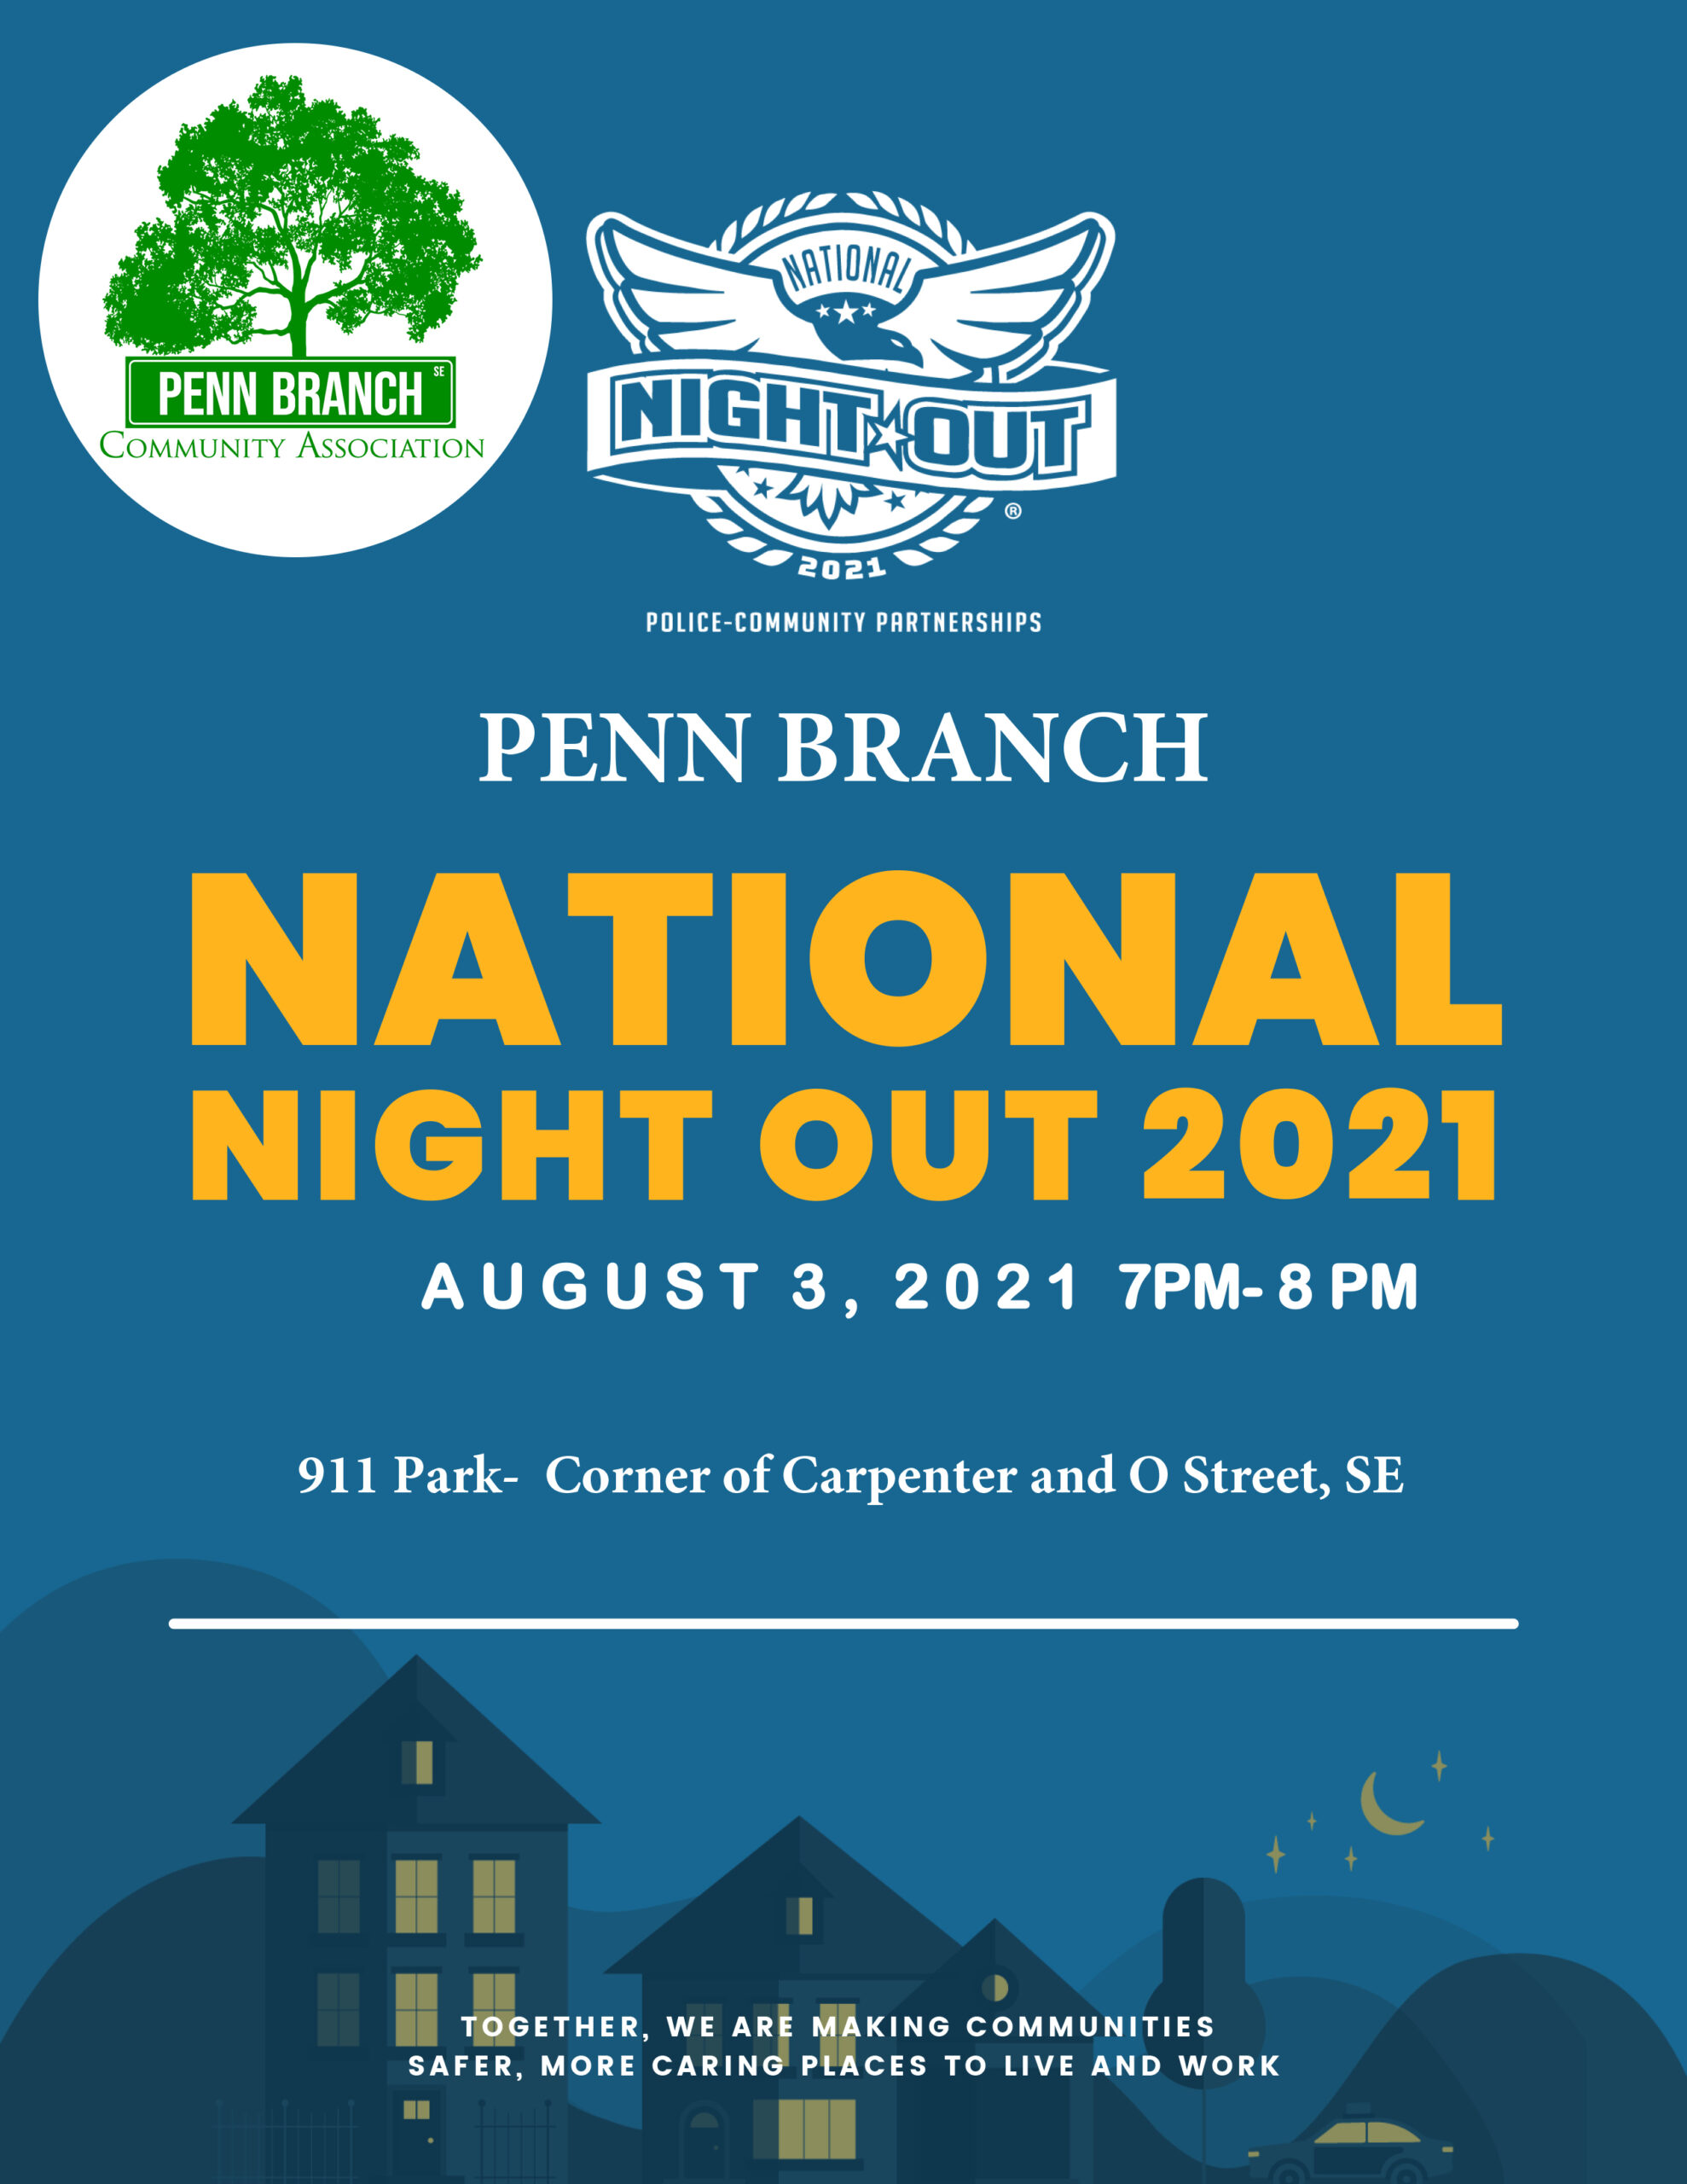 National Night Out-Penn Branch 2021